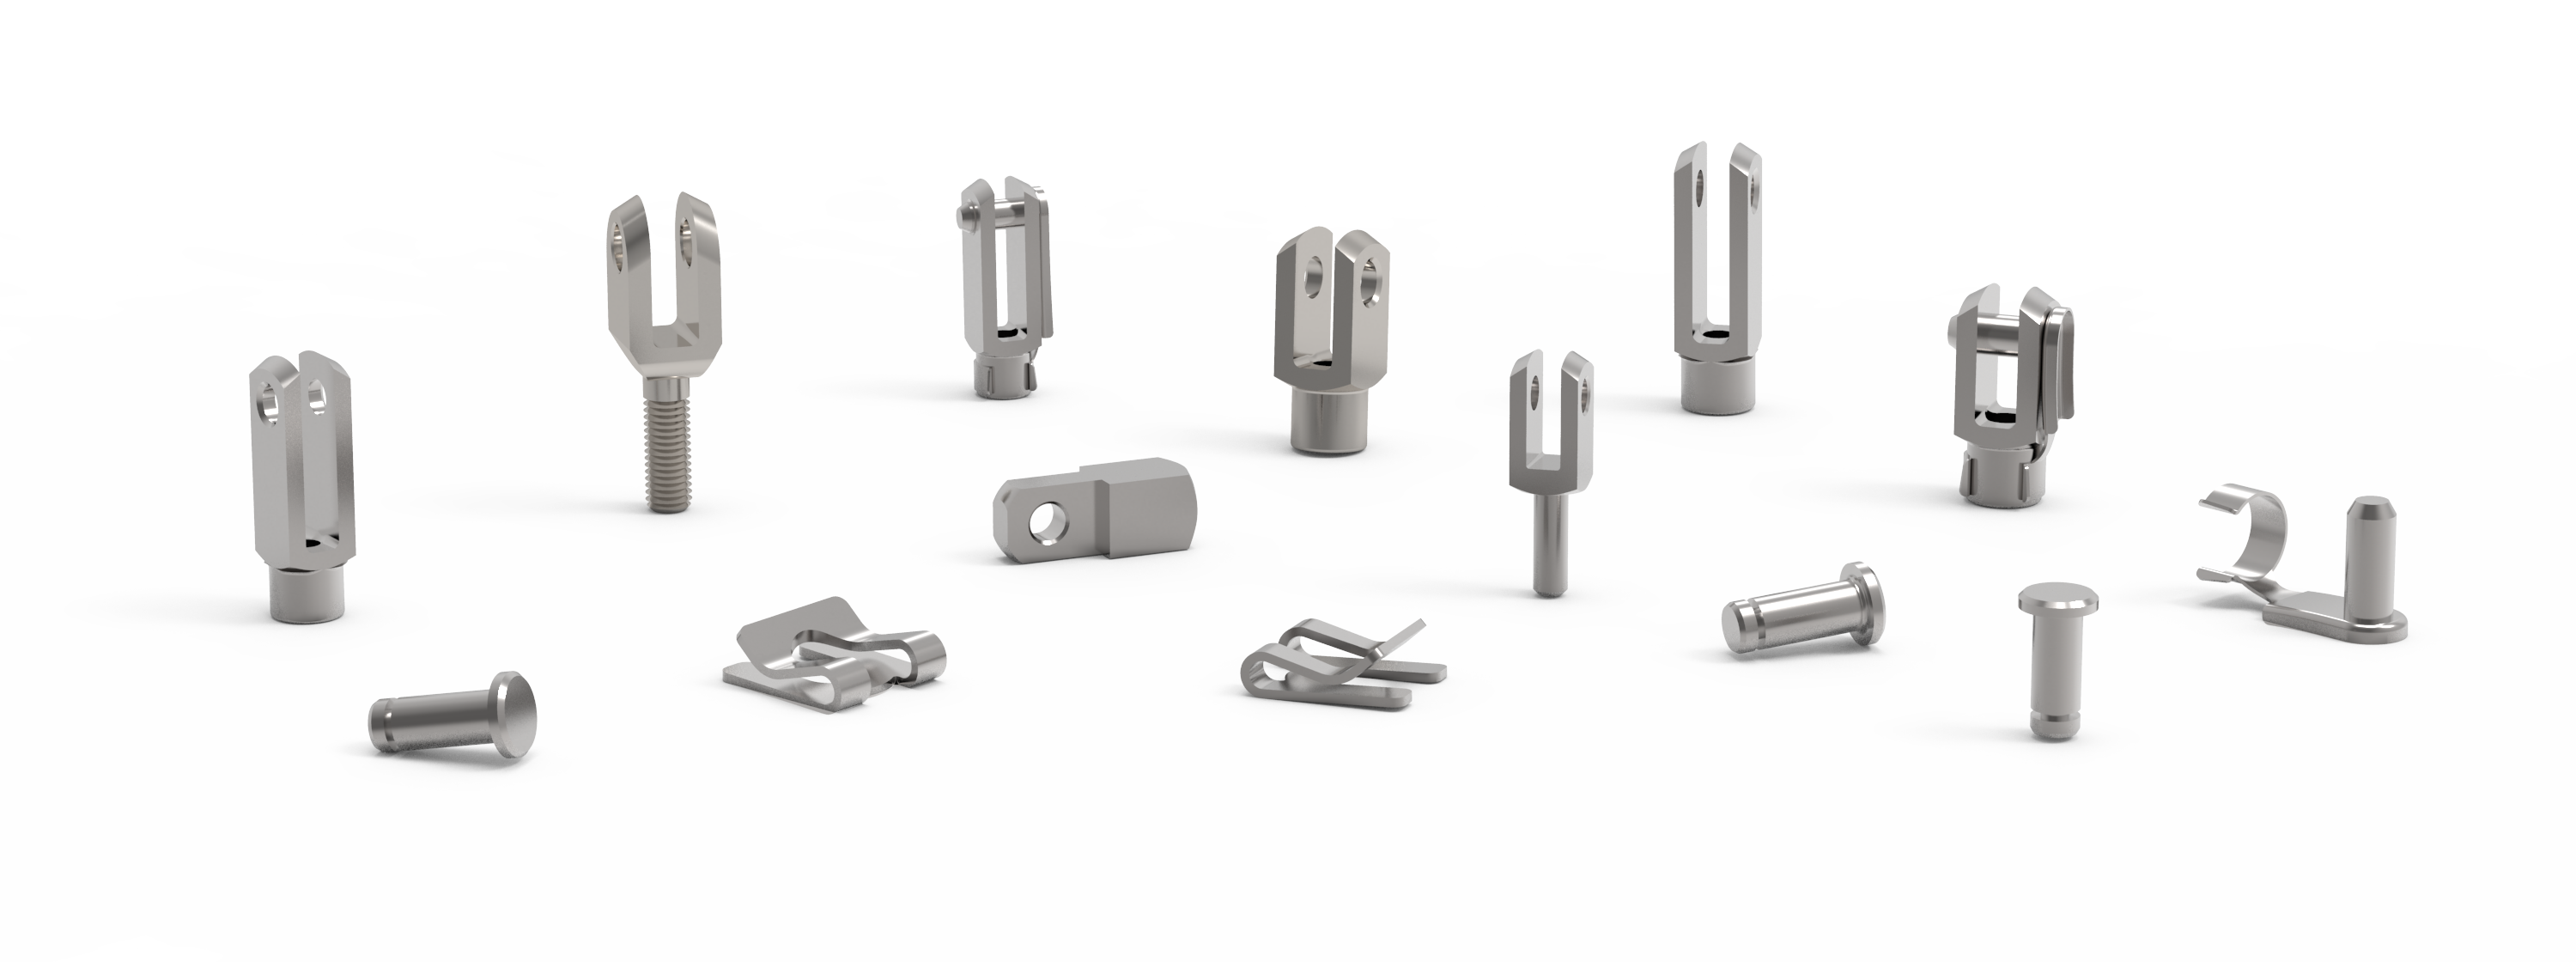 Clevis Joints From Automotion